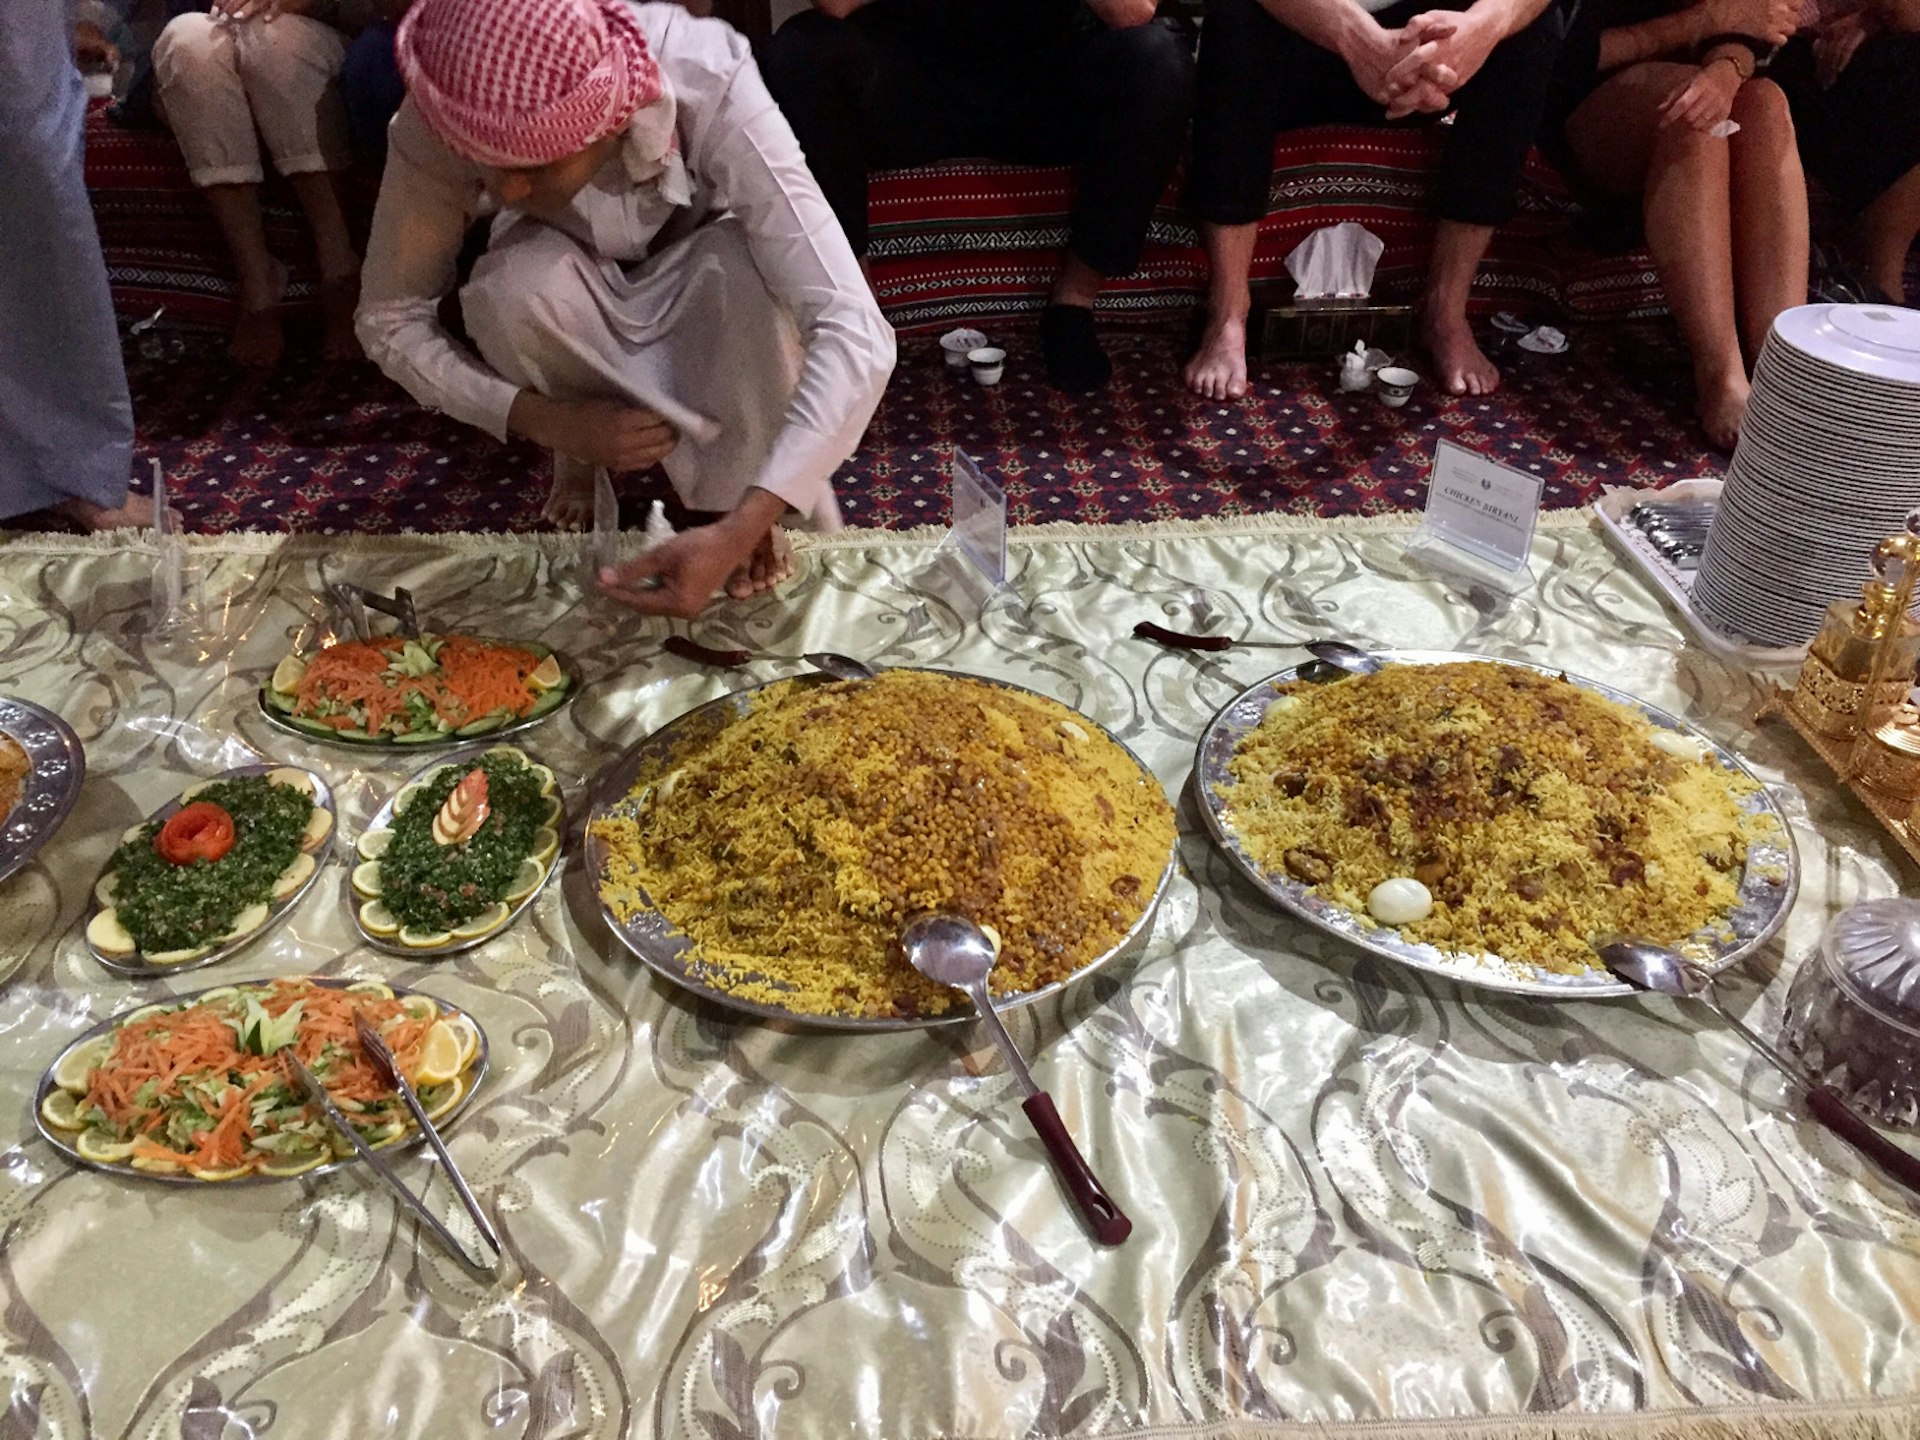 Dishes being laid out at the Sheikh Mohammed Centre for Cultural Understanding in preparation for iftar © Lauren Keith / Lonely Planet